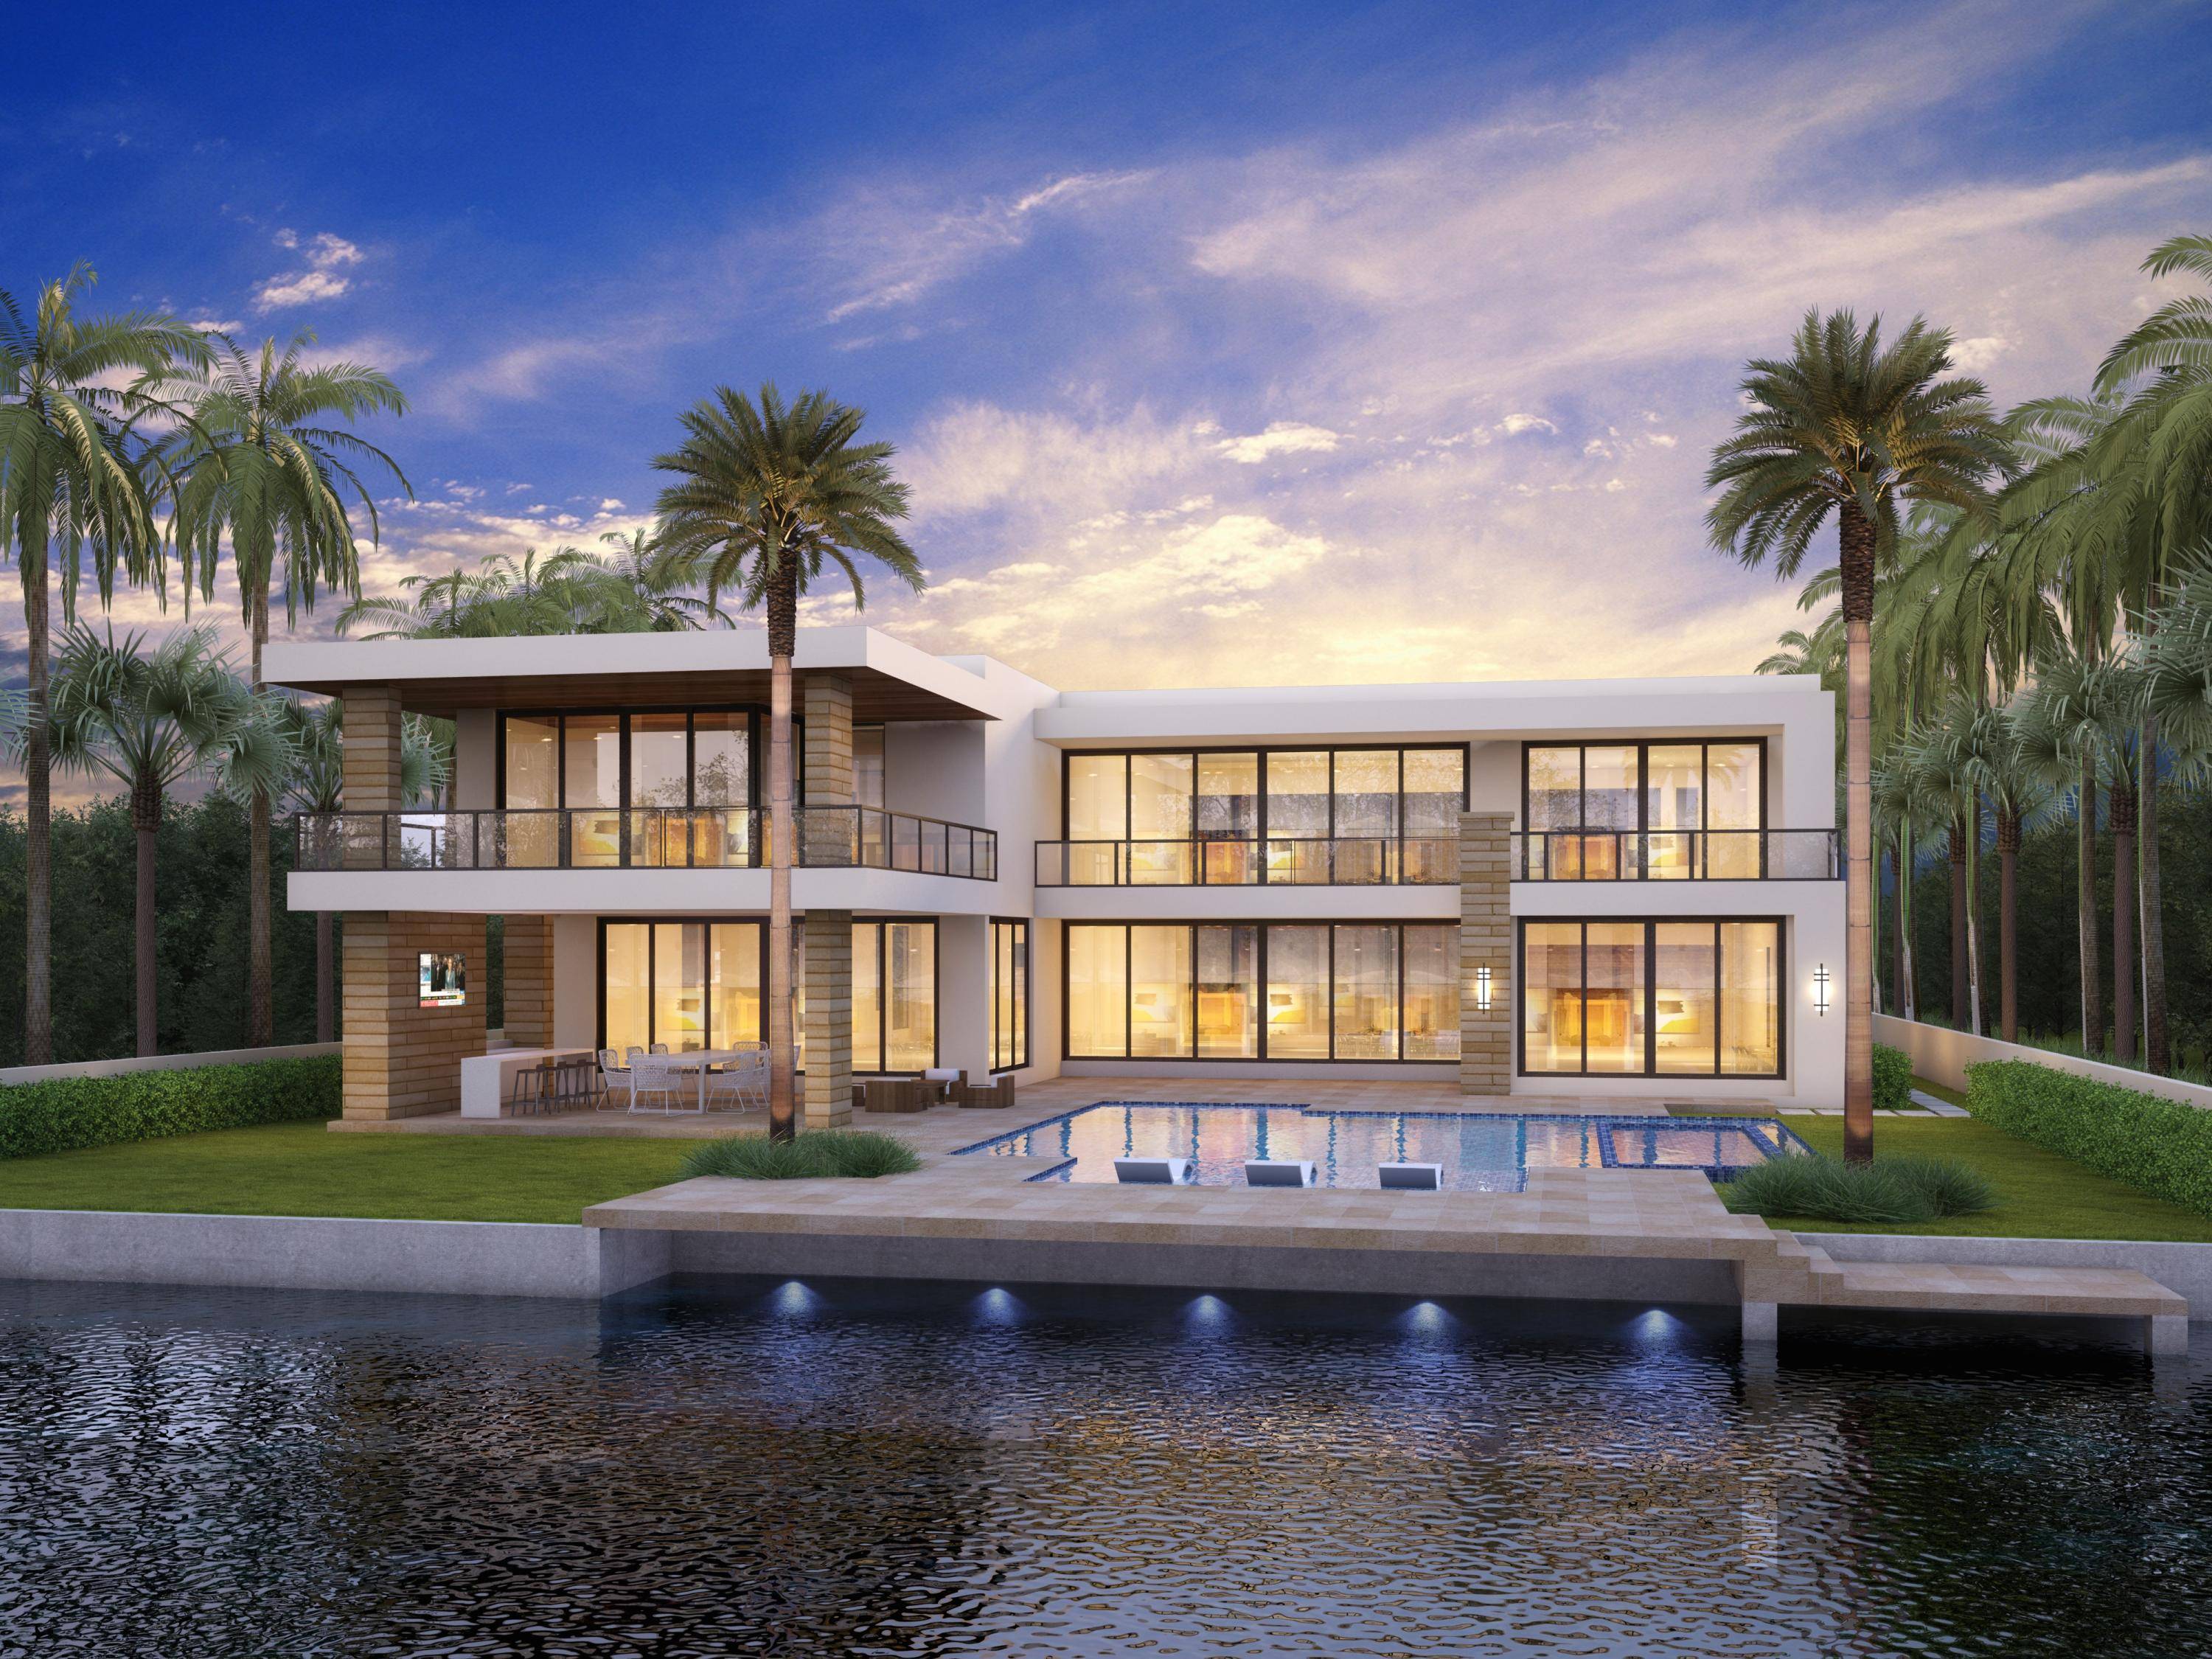 New Gated Architectural Intracoastal Masterpiece on Boca Raton's sought after Spanish River Road in 'The Estate Section' by renowned Builder JH Norman and famed Brenner Architectural Group.